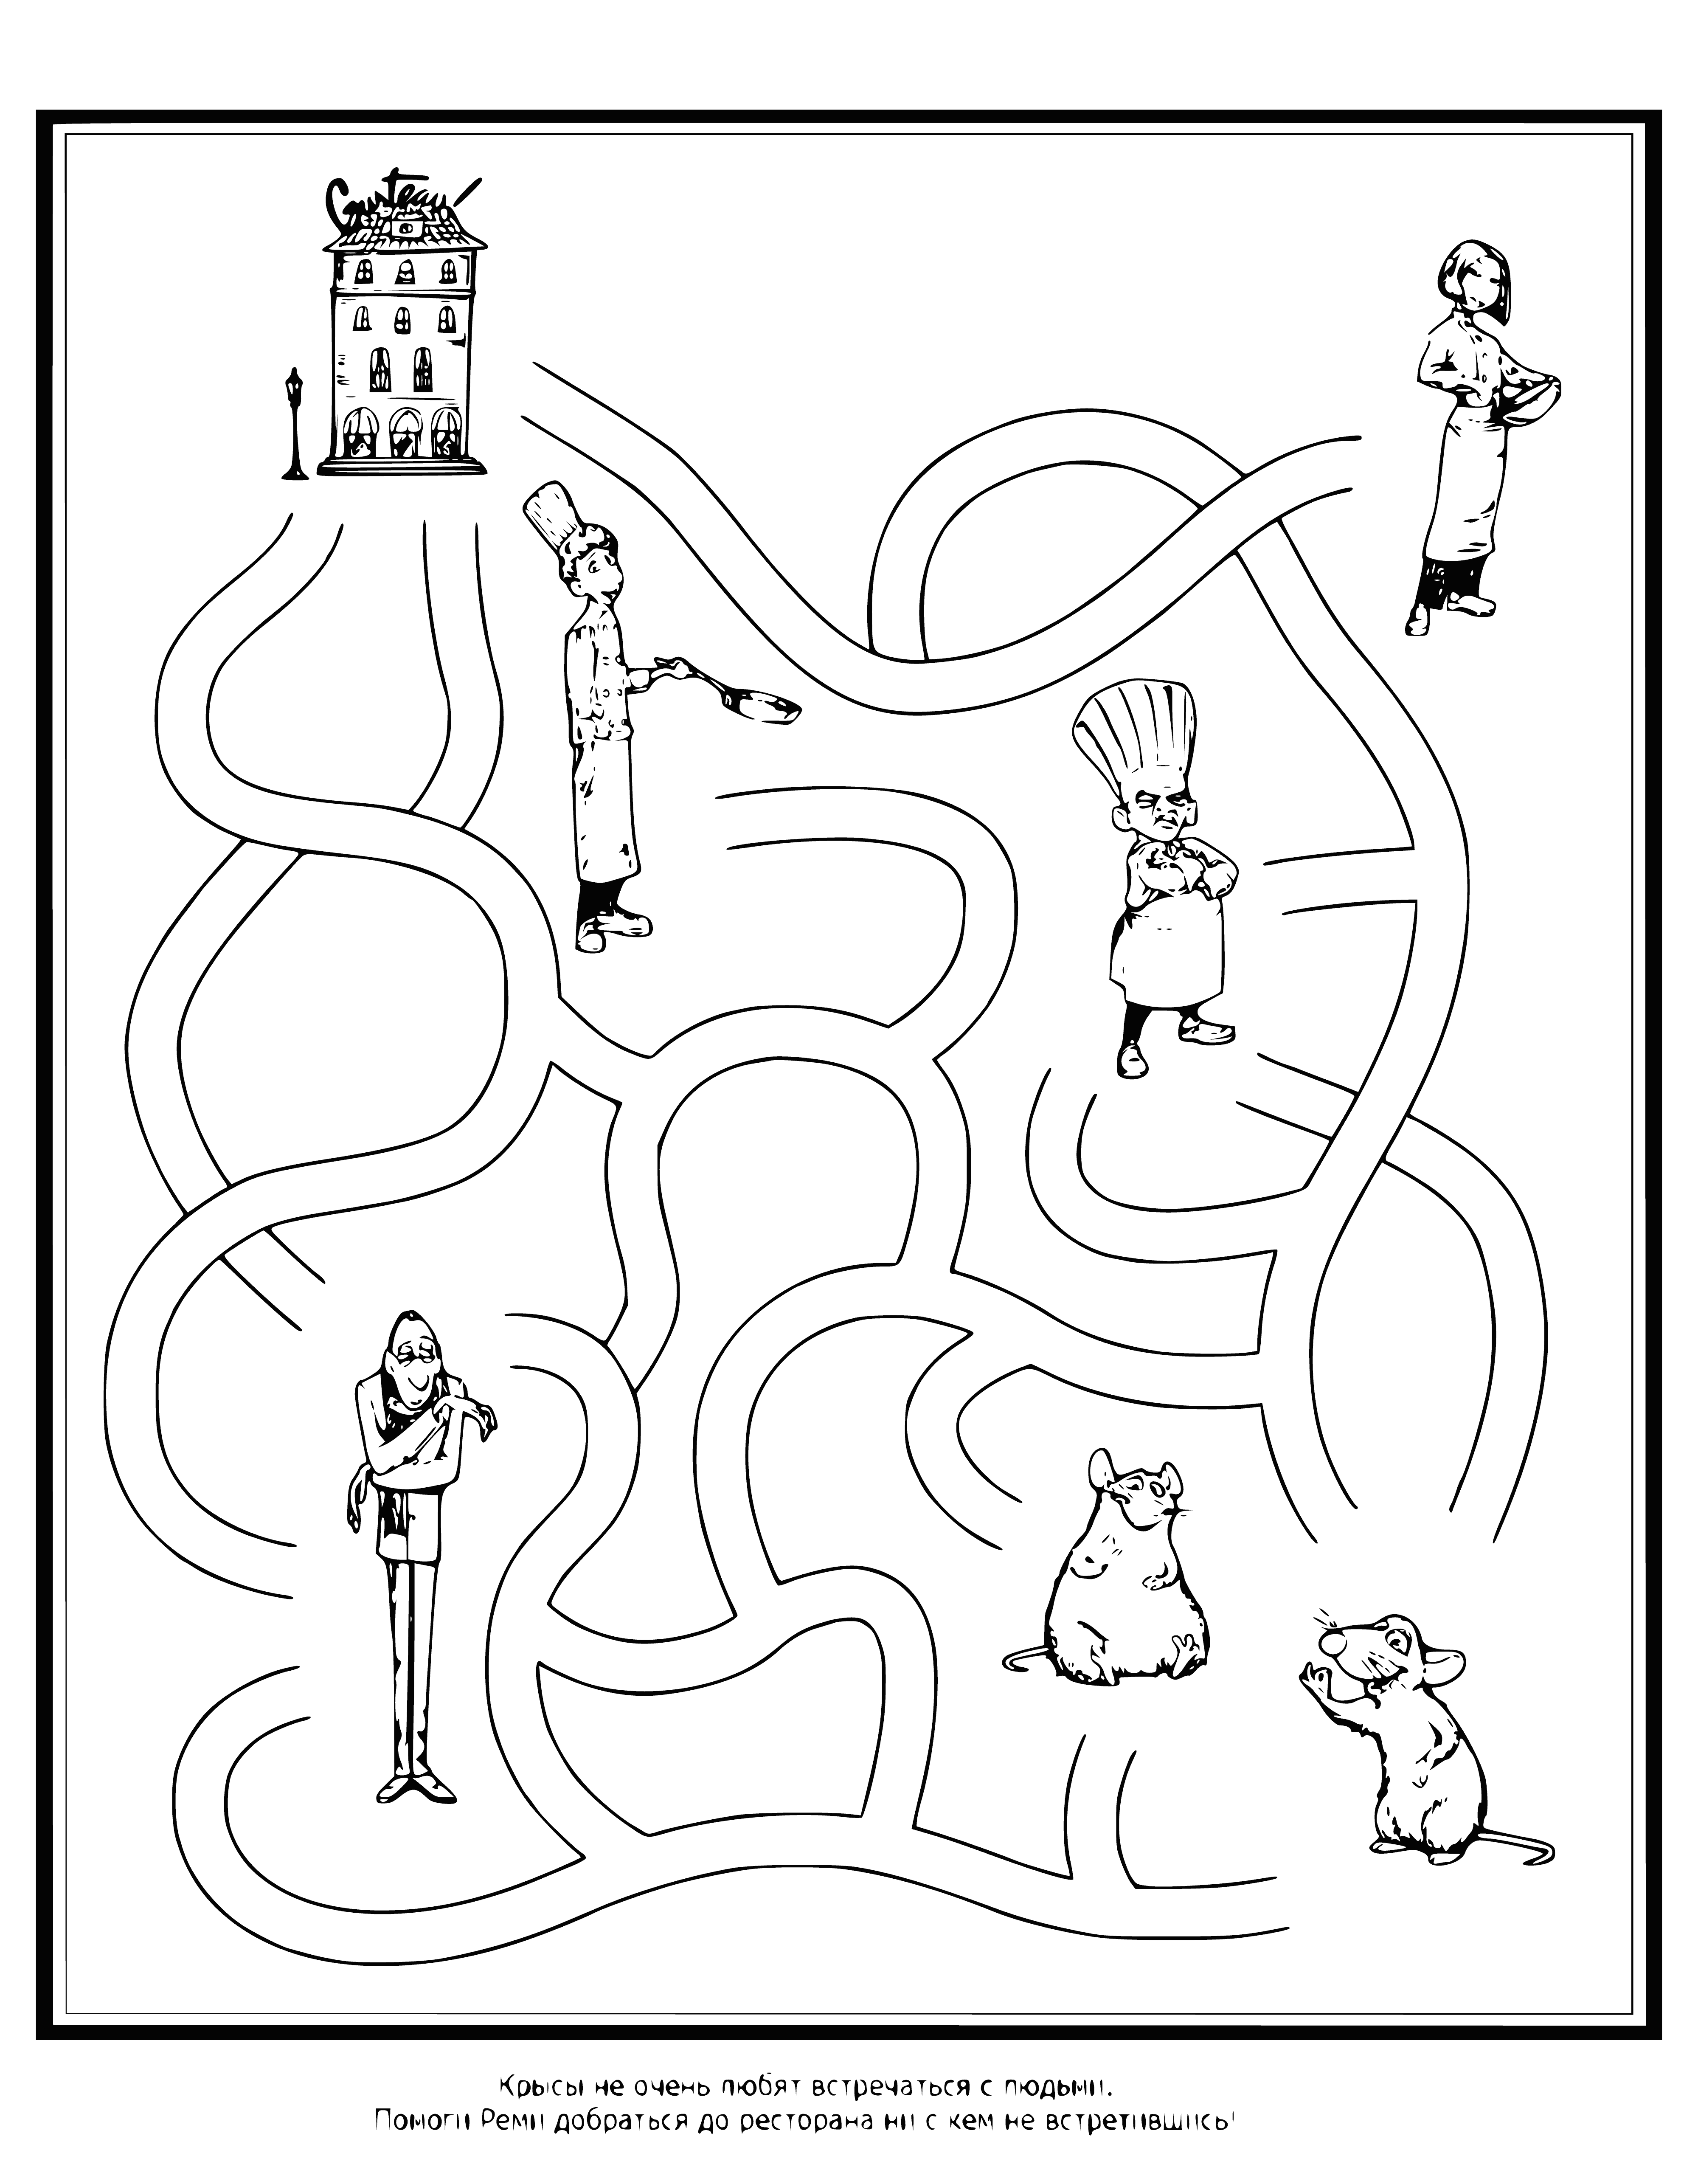 coloring page: A large white rat is in the center of a green & brown maze with paths to escape.